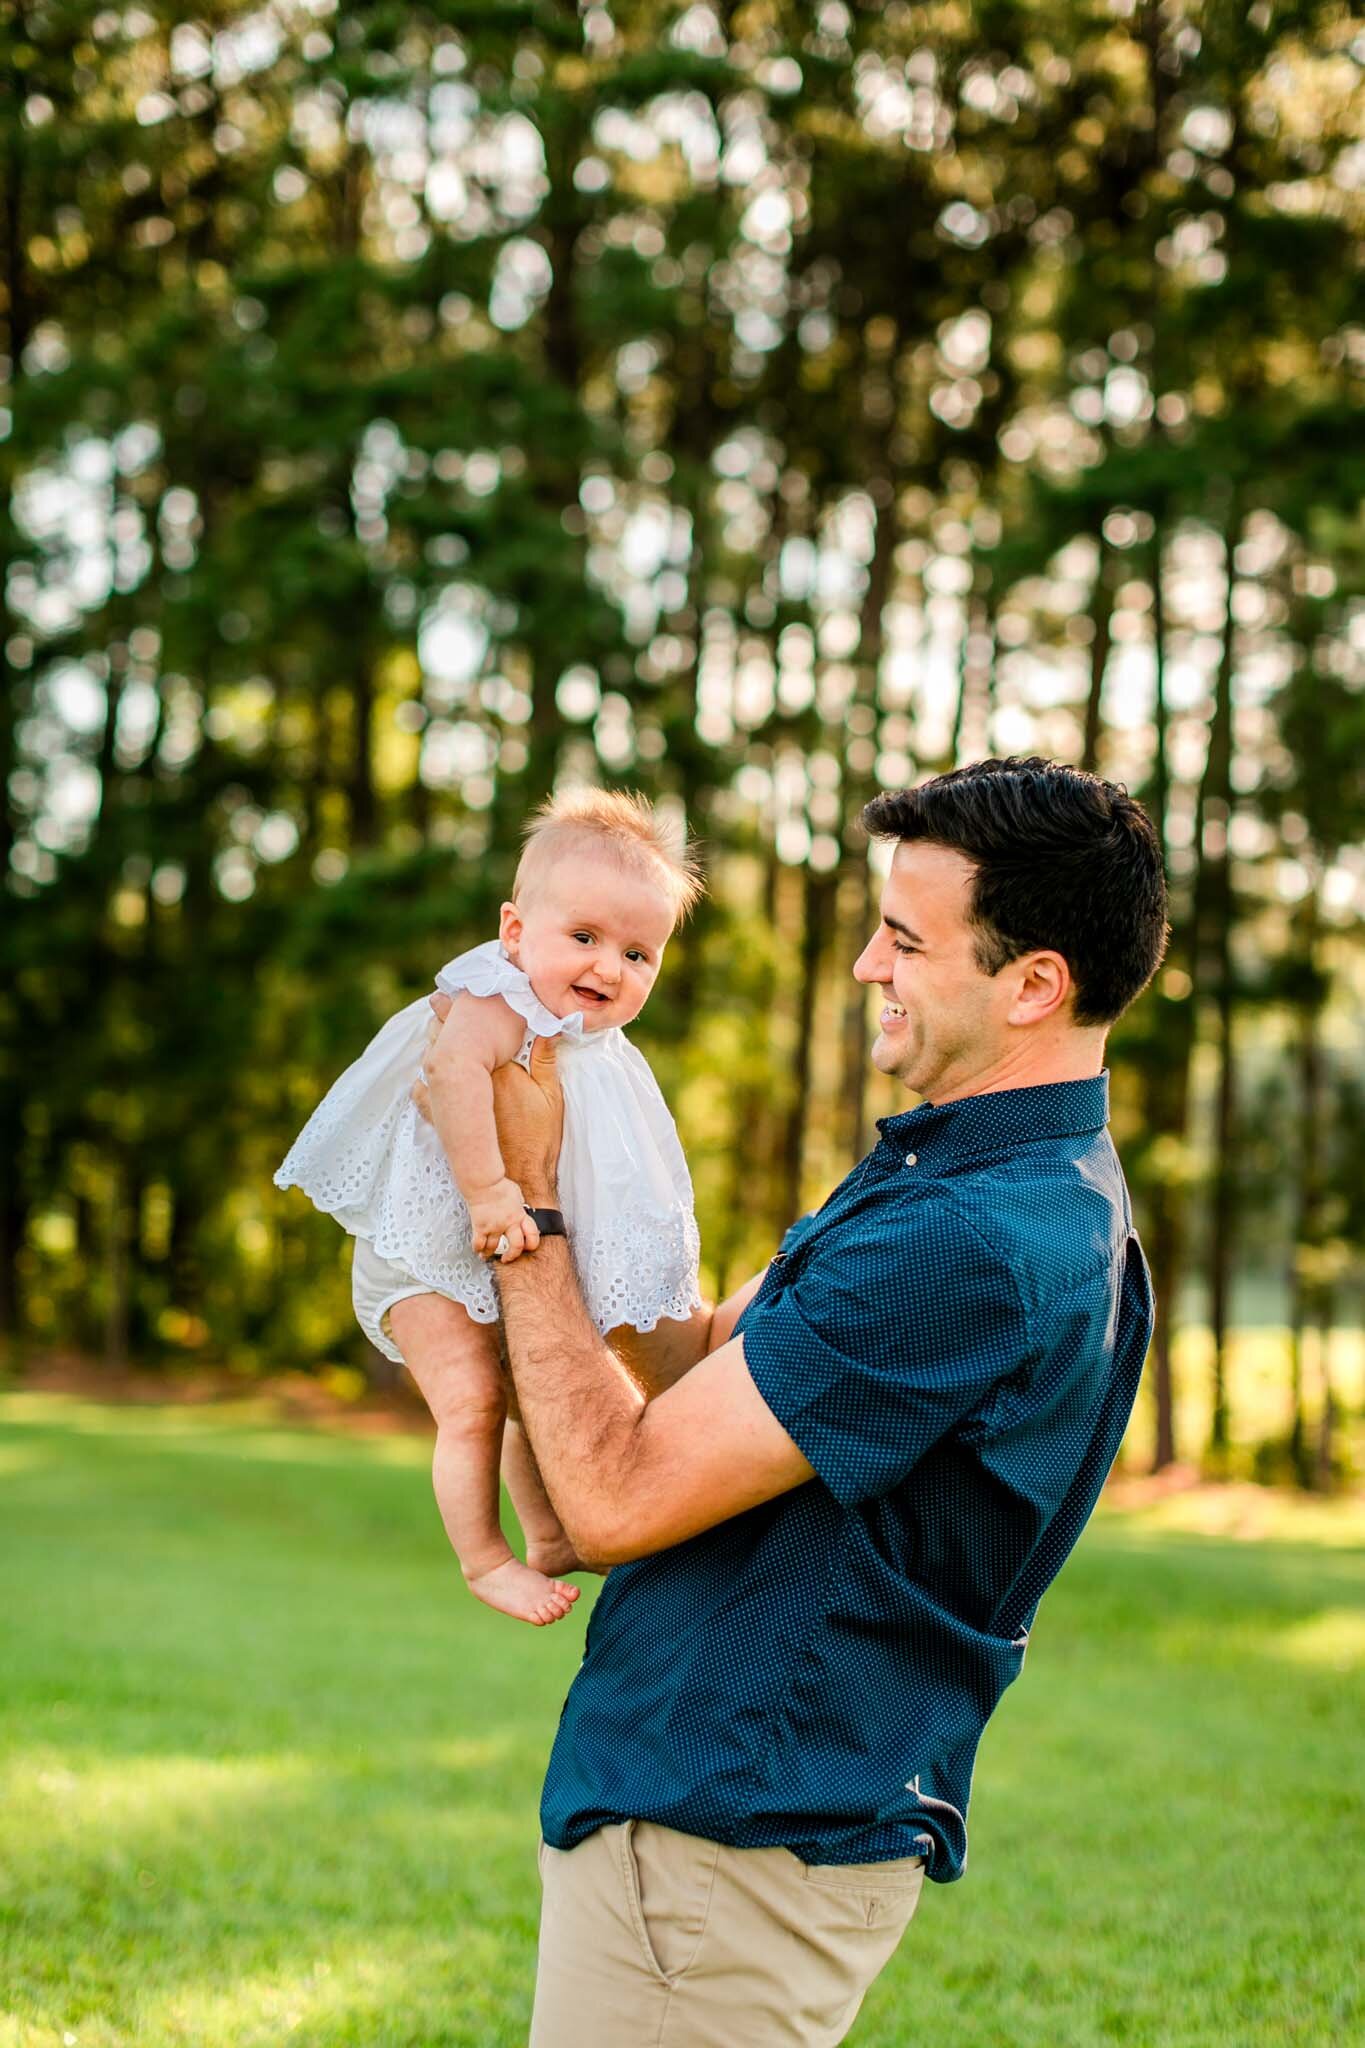 Raleigh Family Photographer | By G. Lin Photography | Dix Park | Candid photo of dad holding baby girl